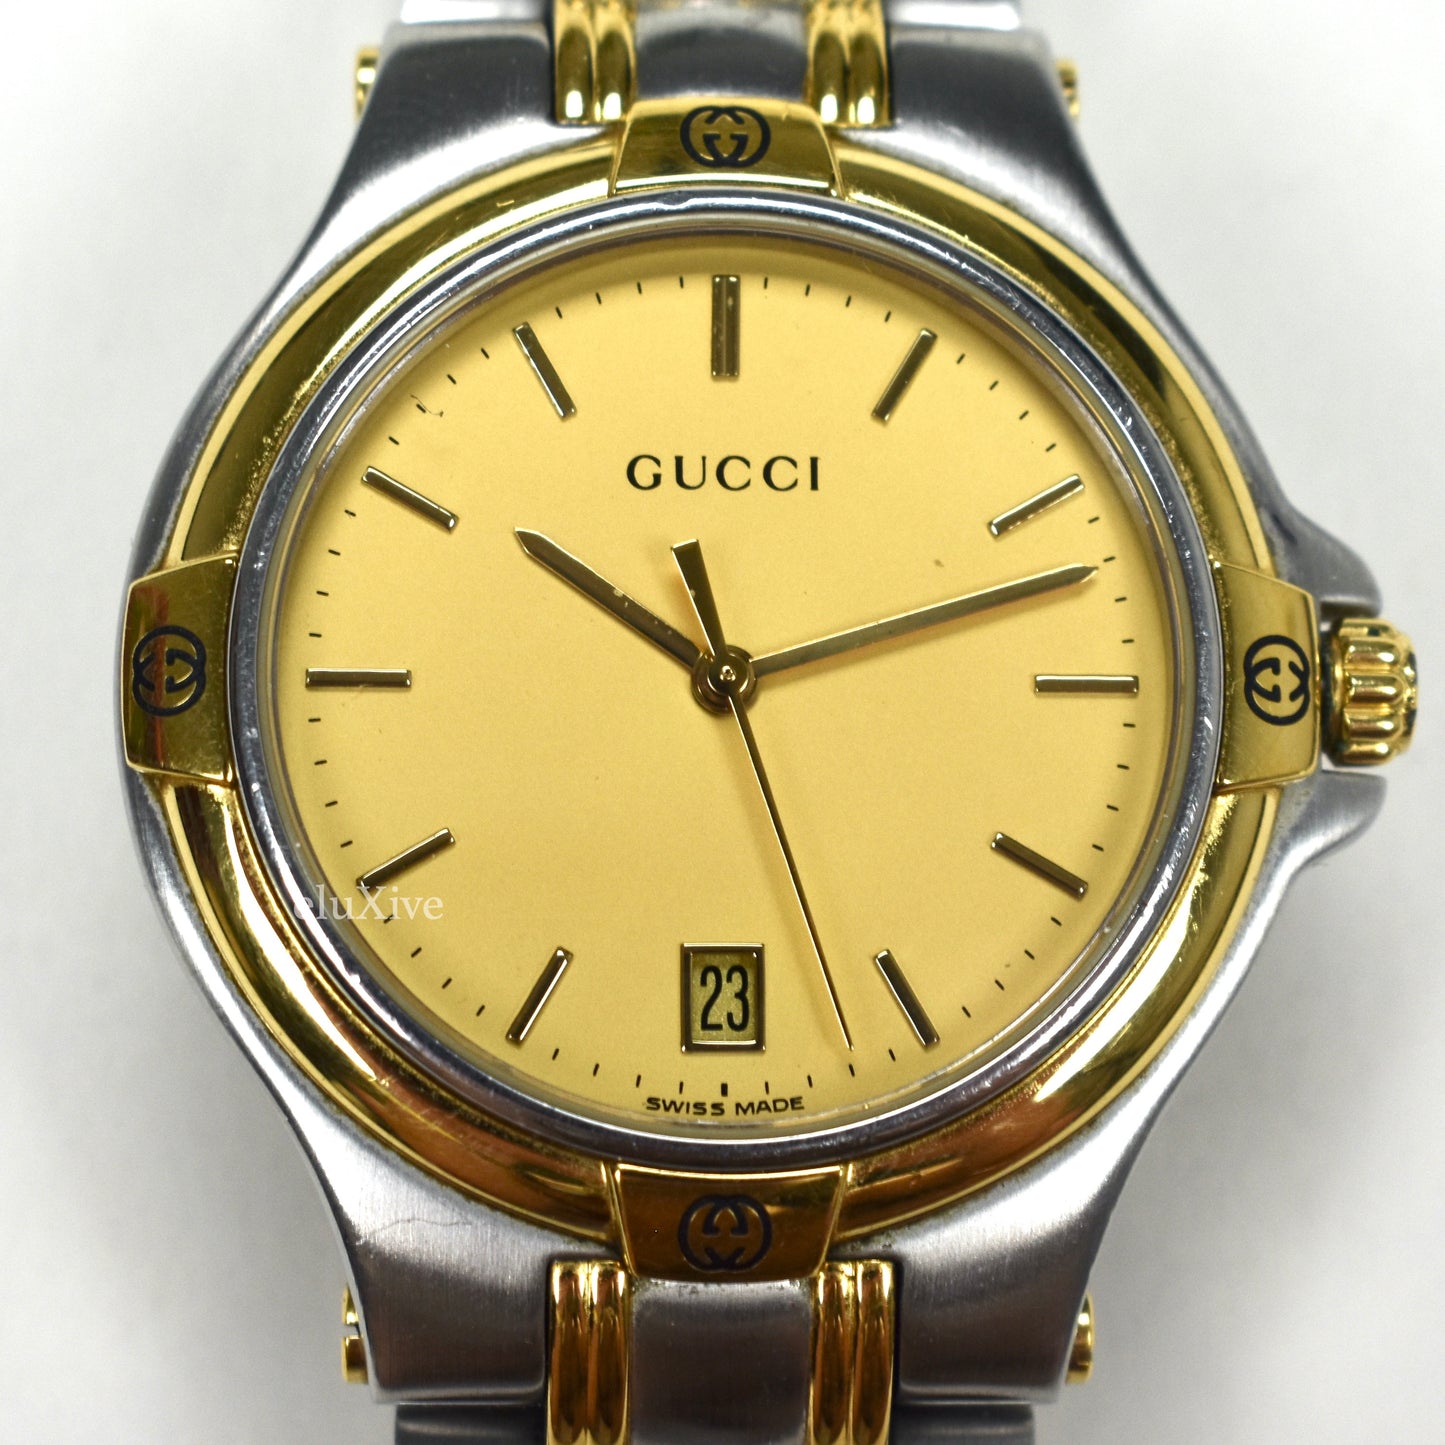 Gucci - 9040M Gold/Steel Champagne Dial Watch